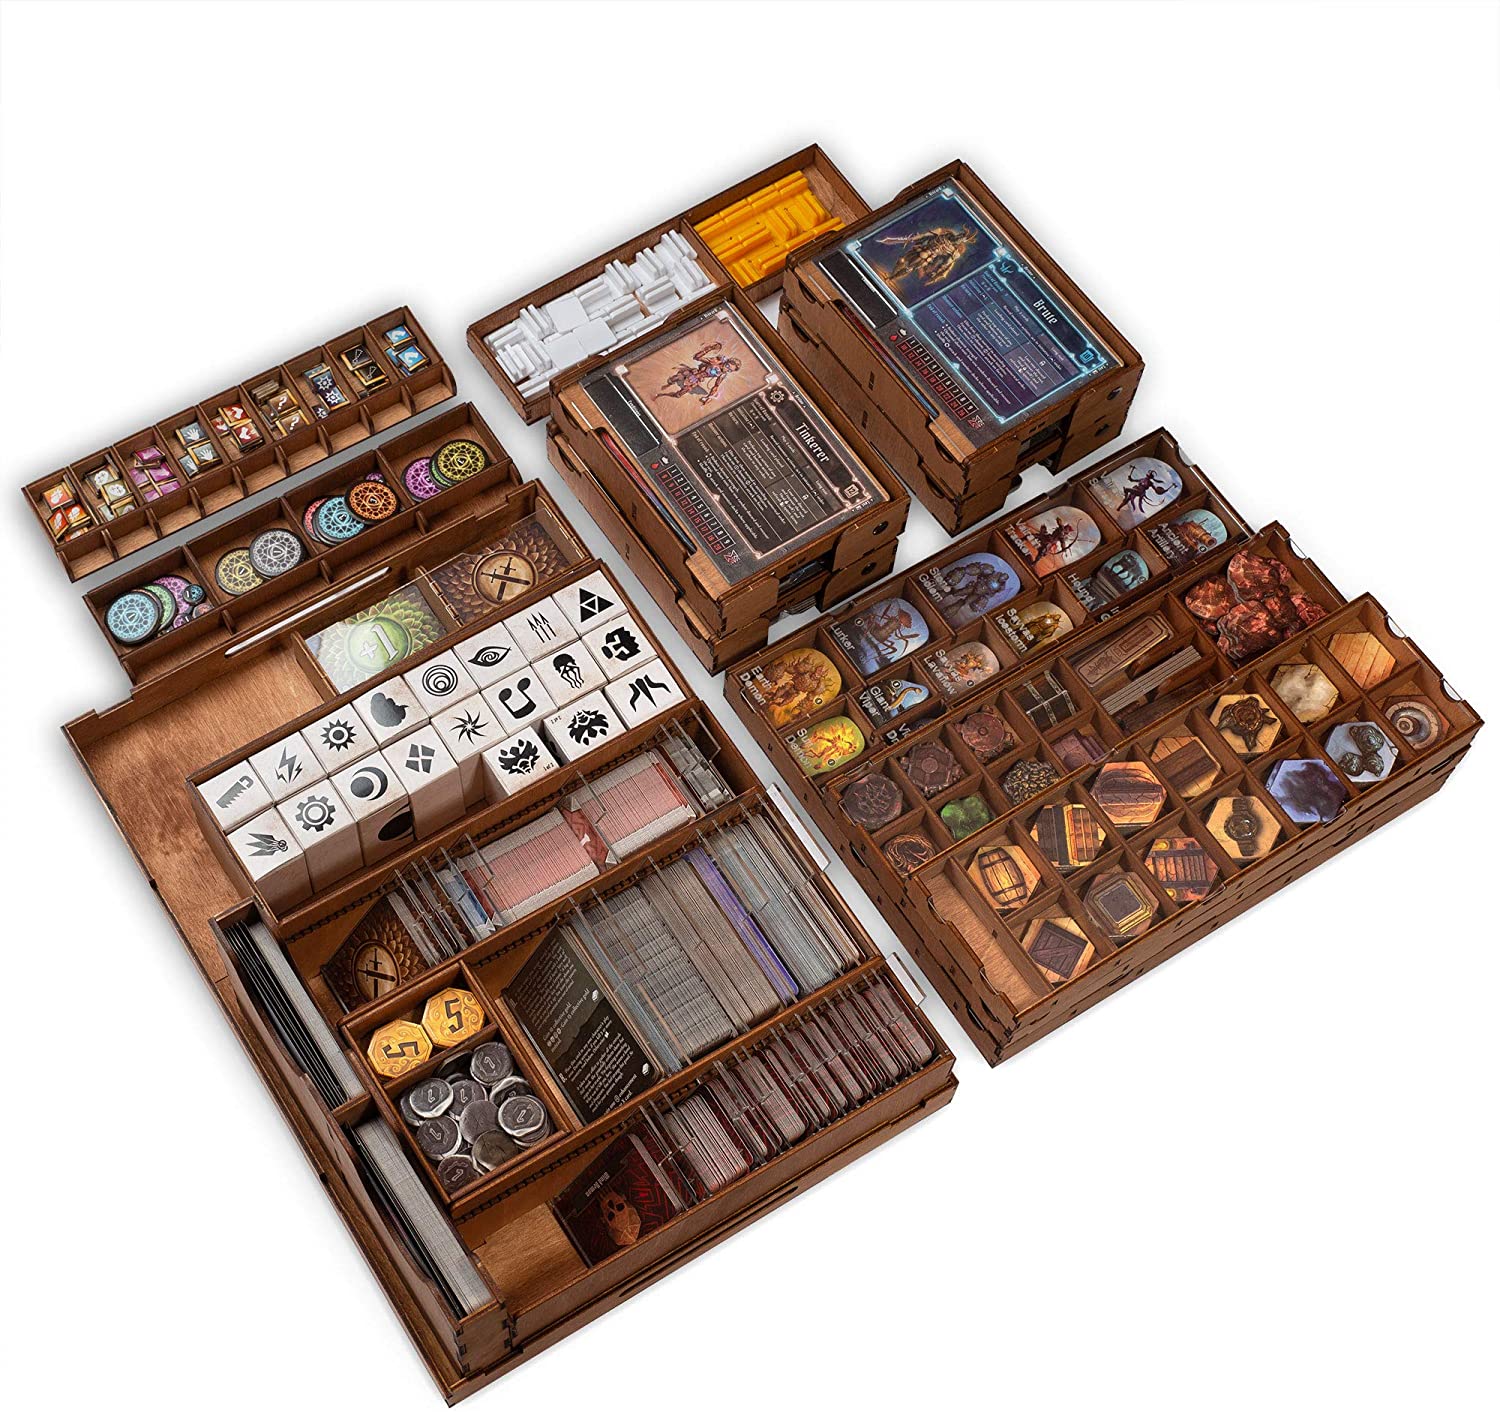 how everything fits in the gloomhaven organizer